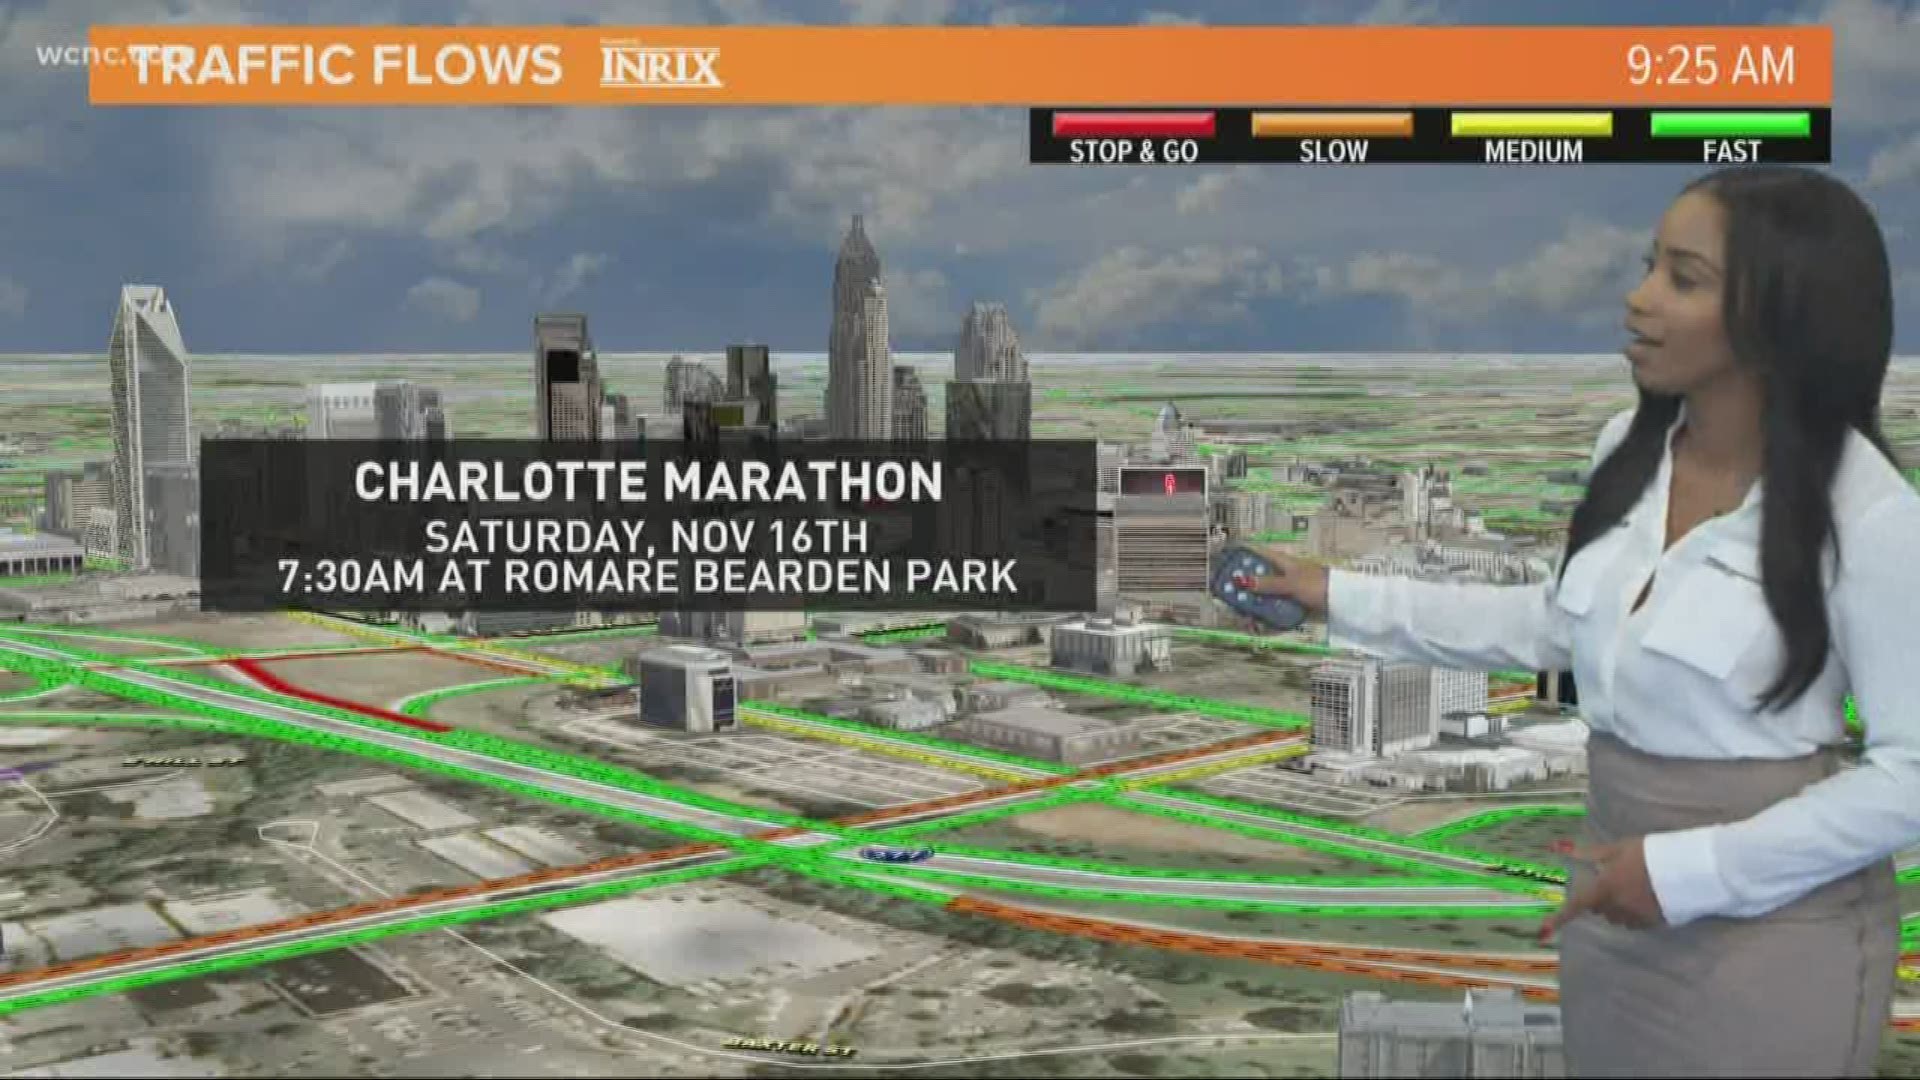 From street closures to the forecast, we've got you covered for the annual Charlotte Marathon.